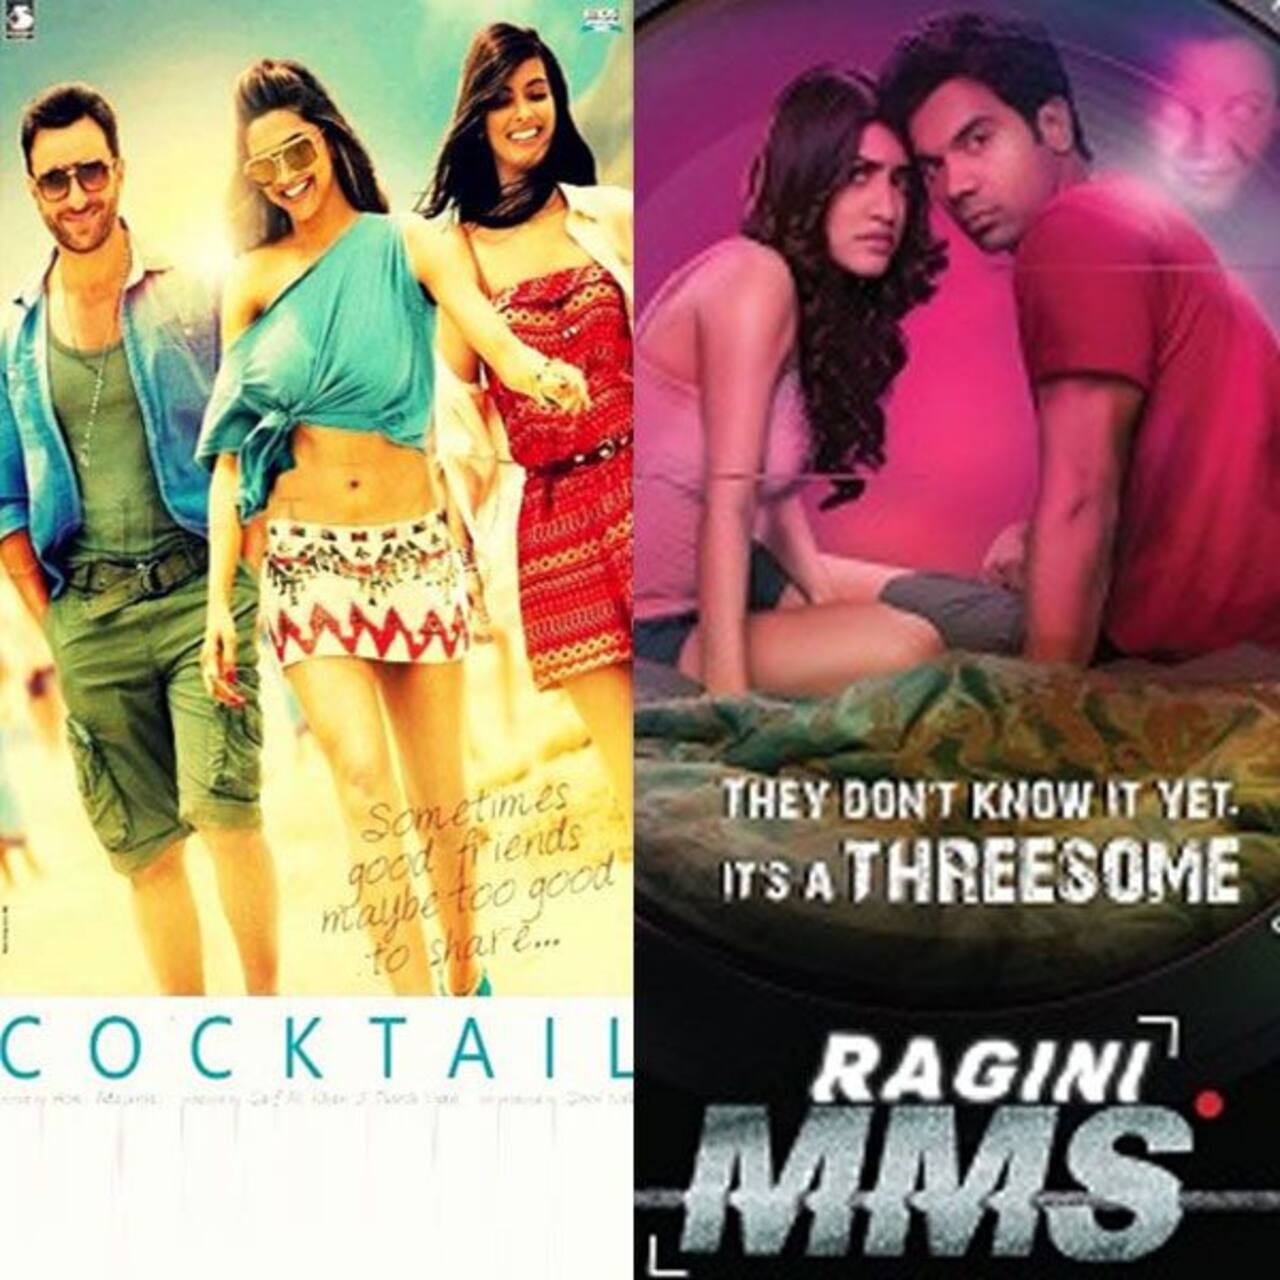 Friday the 13th: Grand Masti, Cocktail and other hit films which released on the ‘unlucky’ day